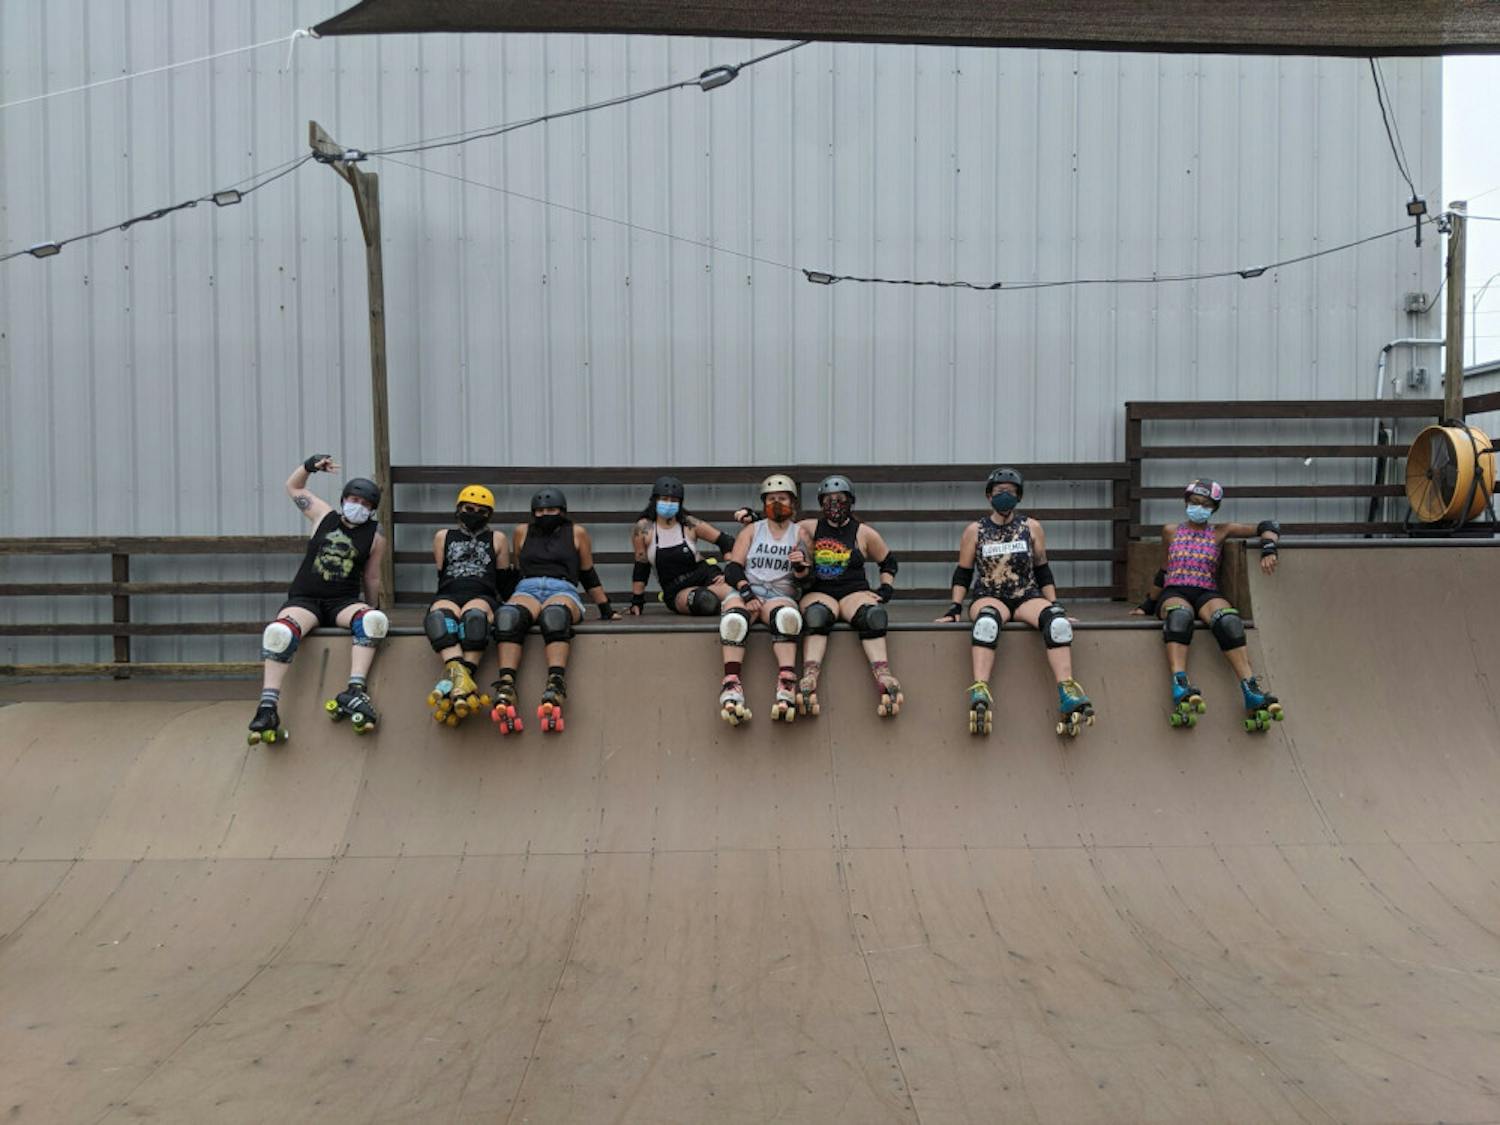 Despite practices and bouts being cancelled, the Roller Rebels have spent time at the skatepark with mask-covered faces to stay happy and healthy.